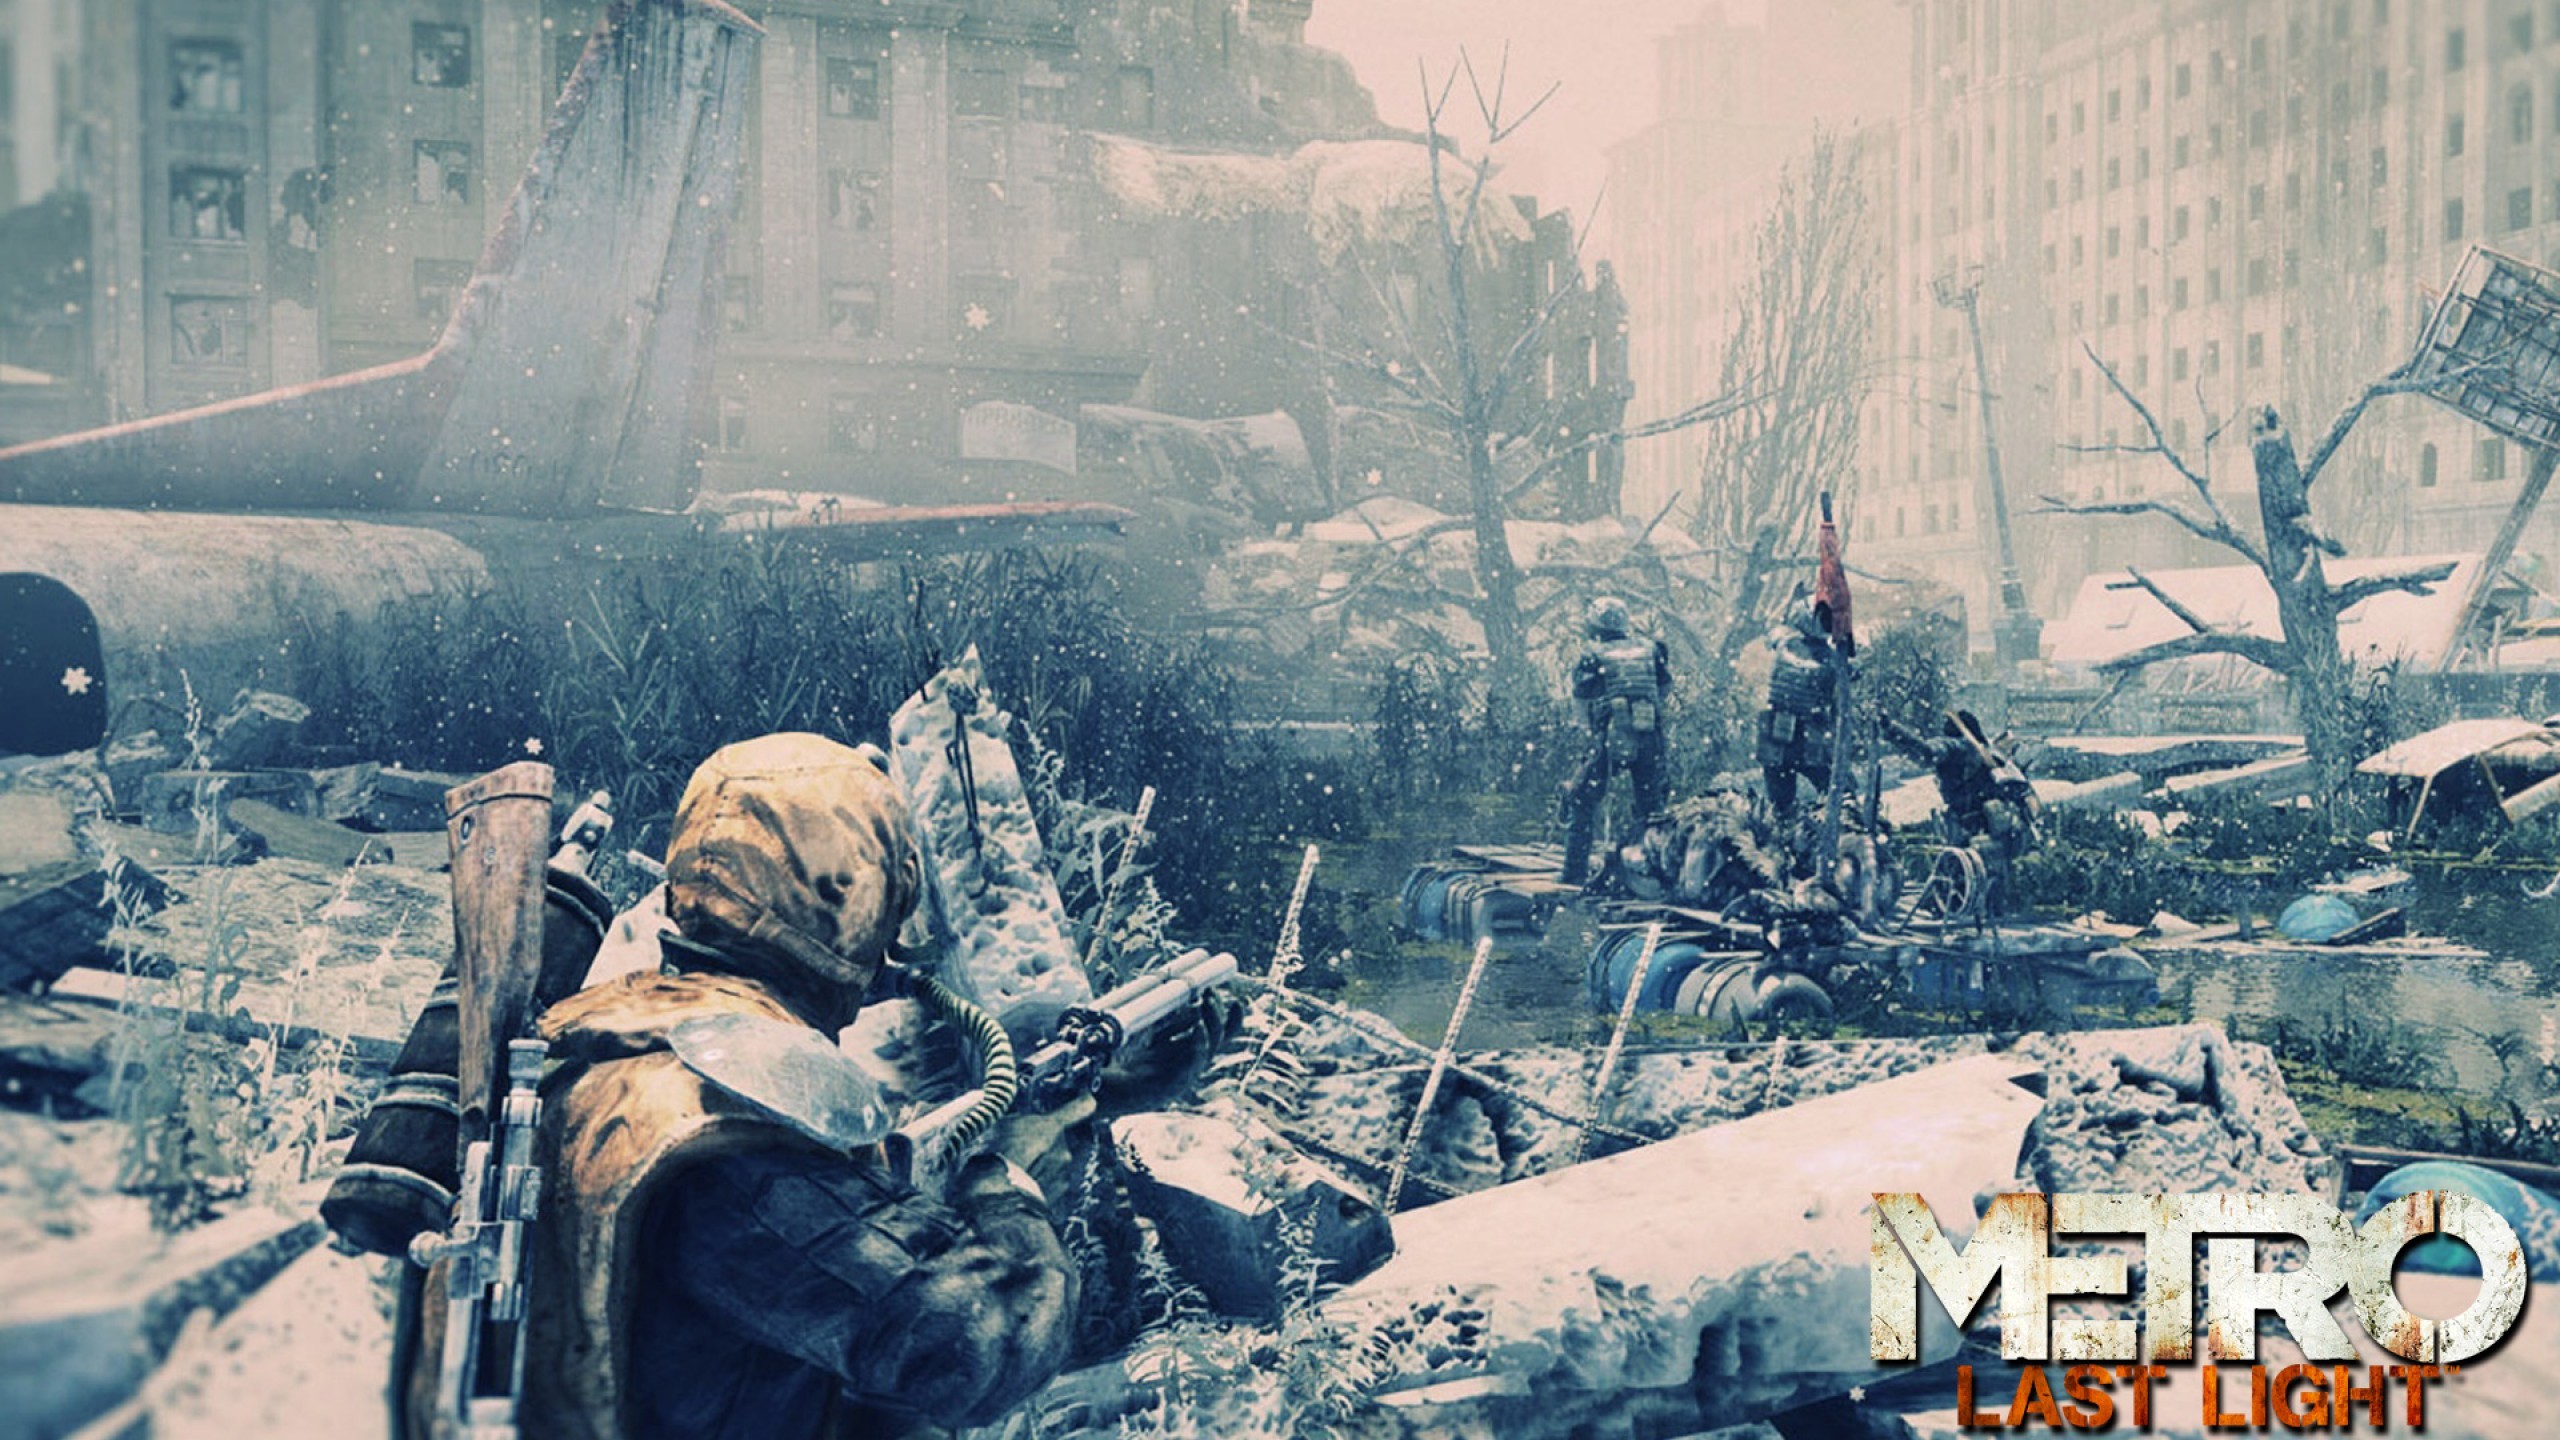 2560x1440 Metro Redux remasters Moscow for Xbox One PC - Metro 2033 and its sequel,  Metro Last Light, are coming to PlayStation Xbox One, PC and SteamOS later  this ...